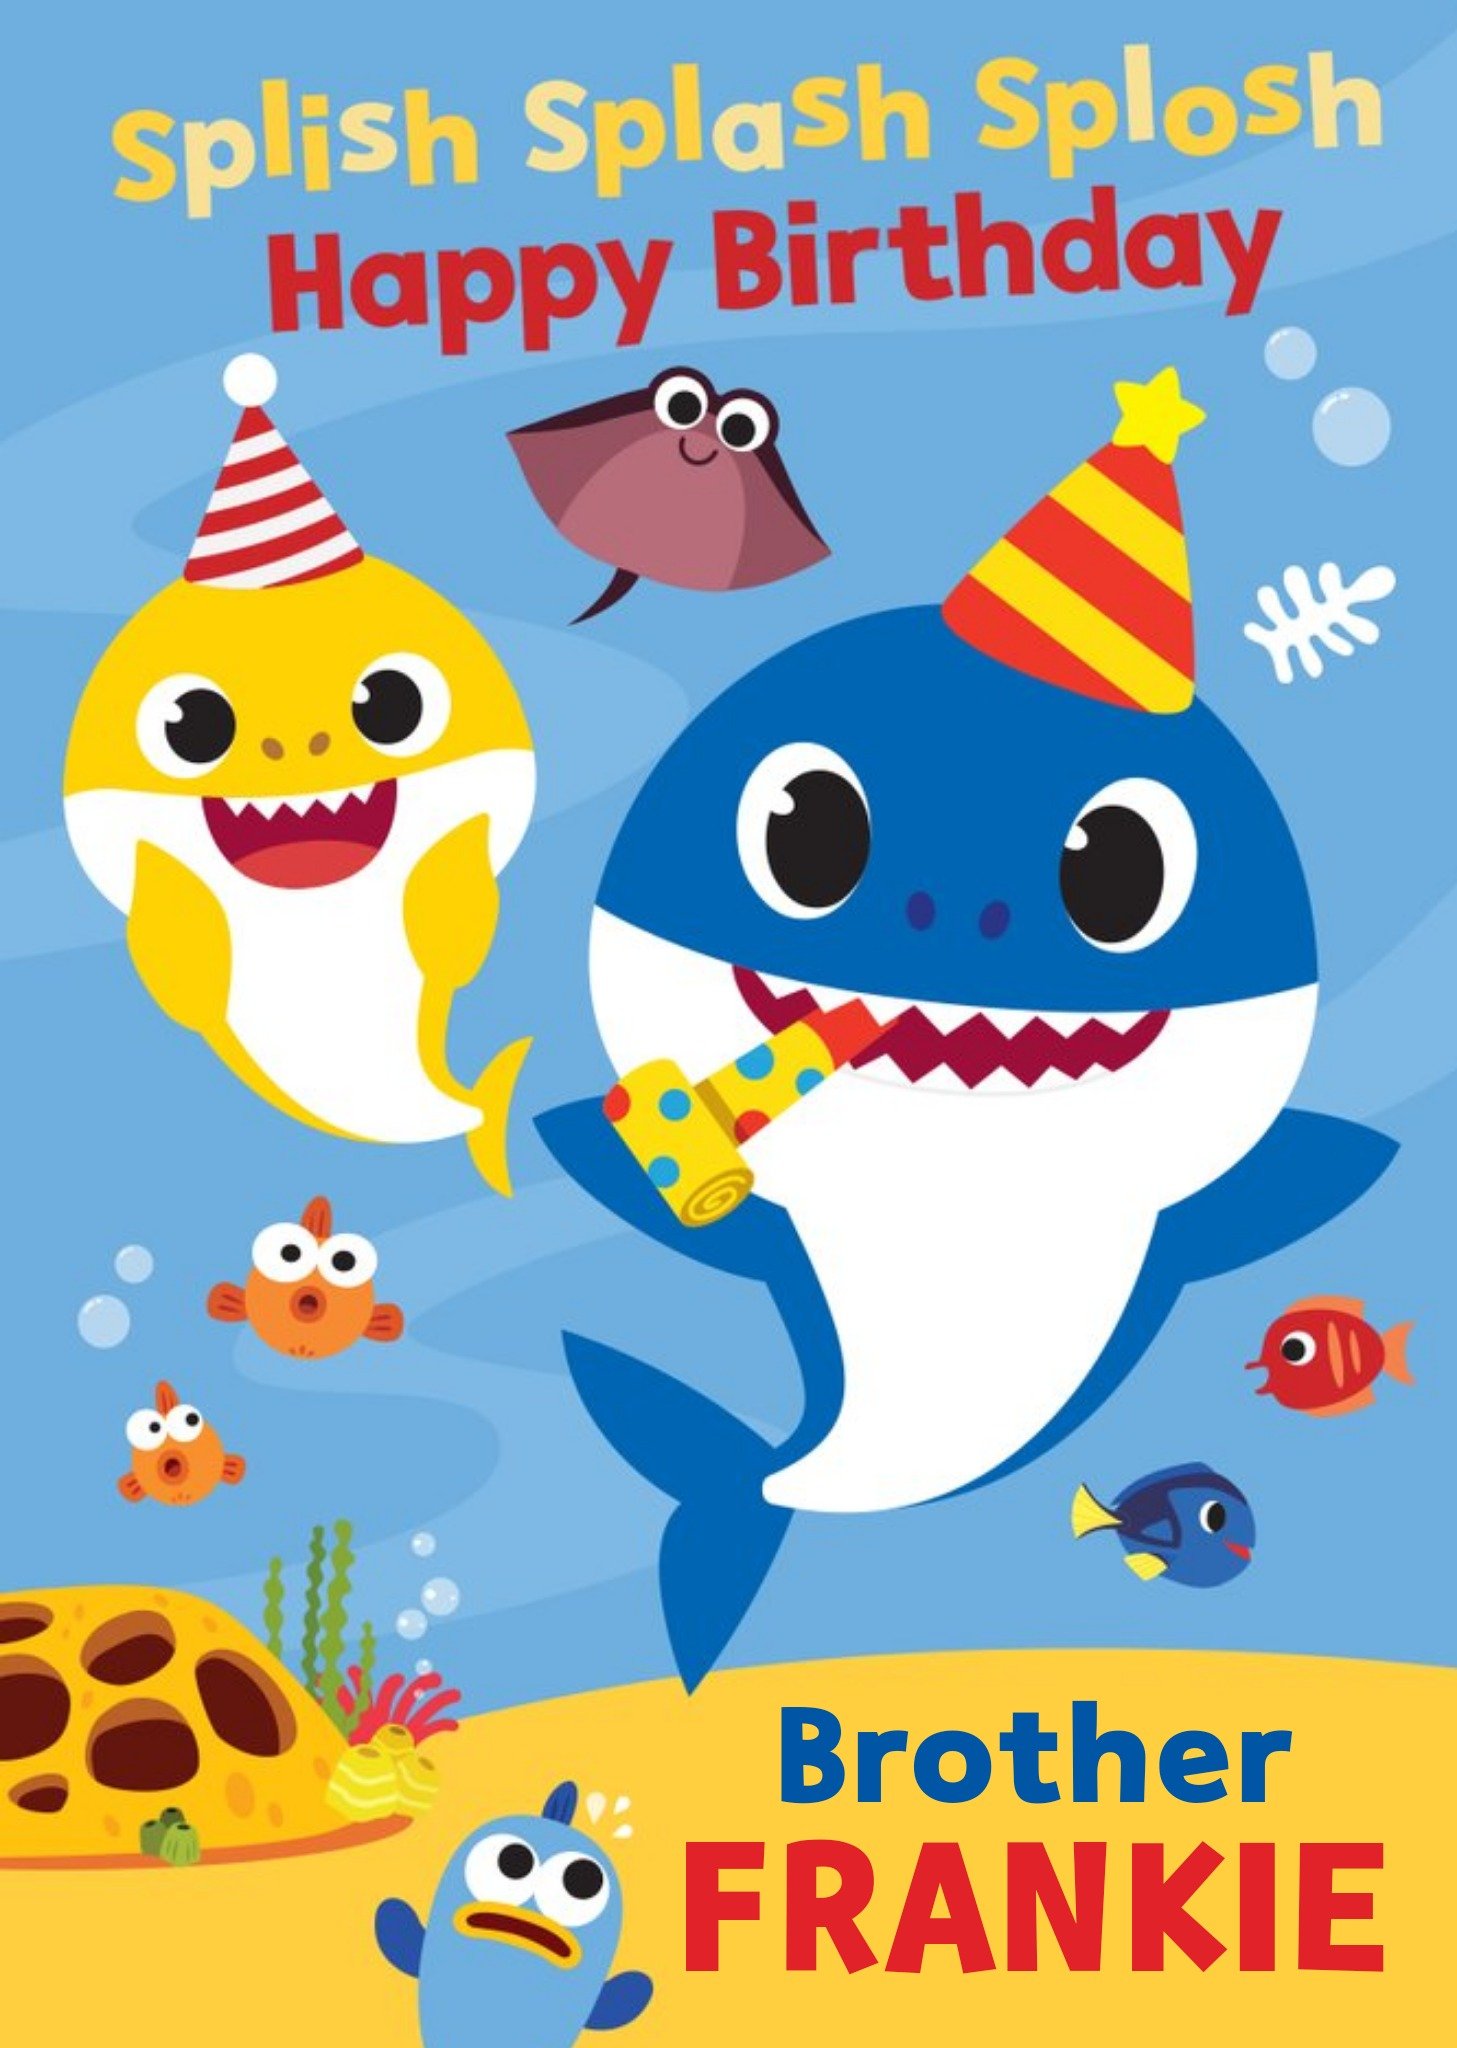 Baby Shark Song Kids Brother Happy Birthday Card, Large